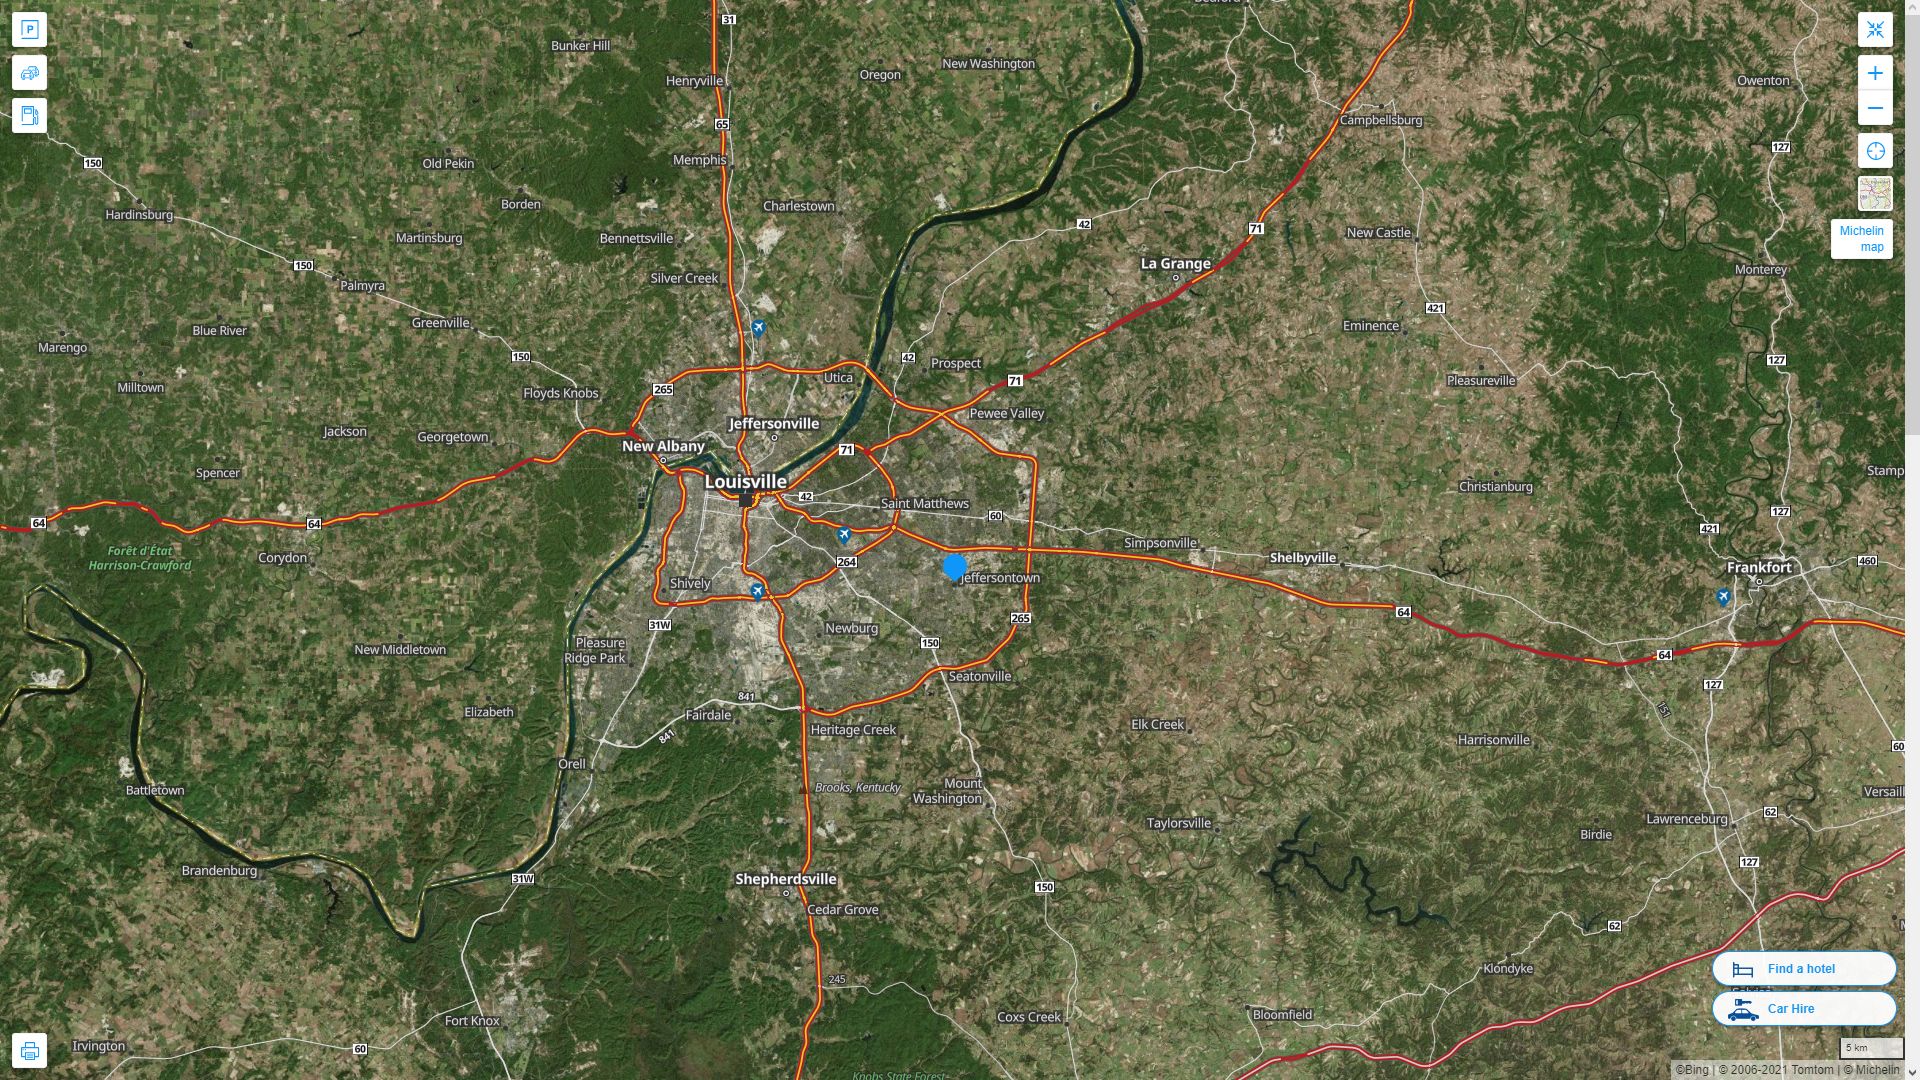 Jeffersontown Kentucky Highway and Road Map with Satellite View